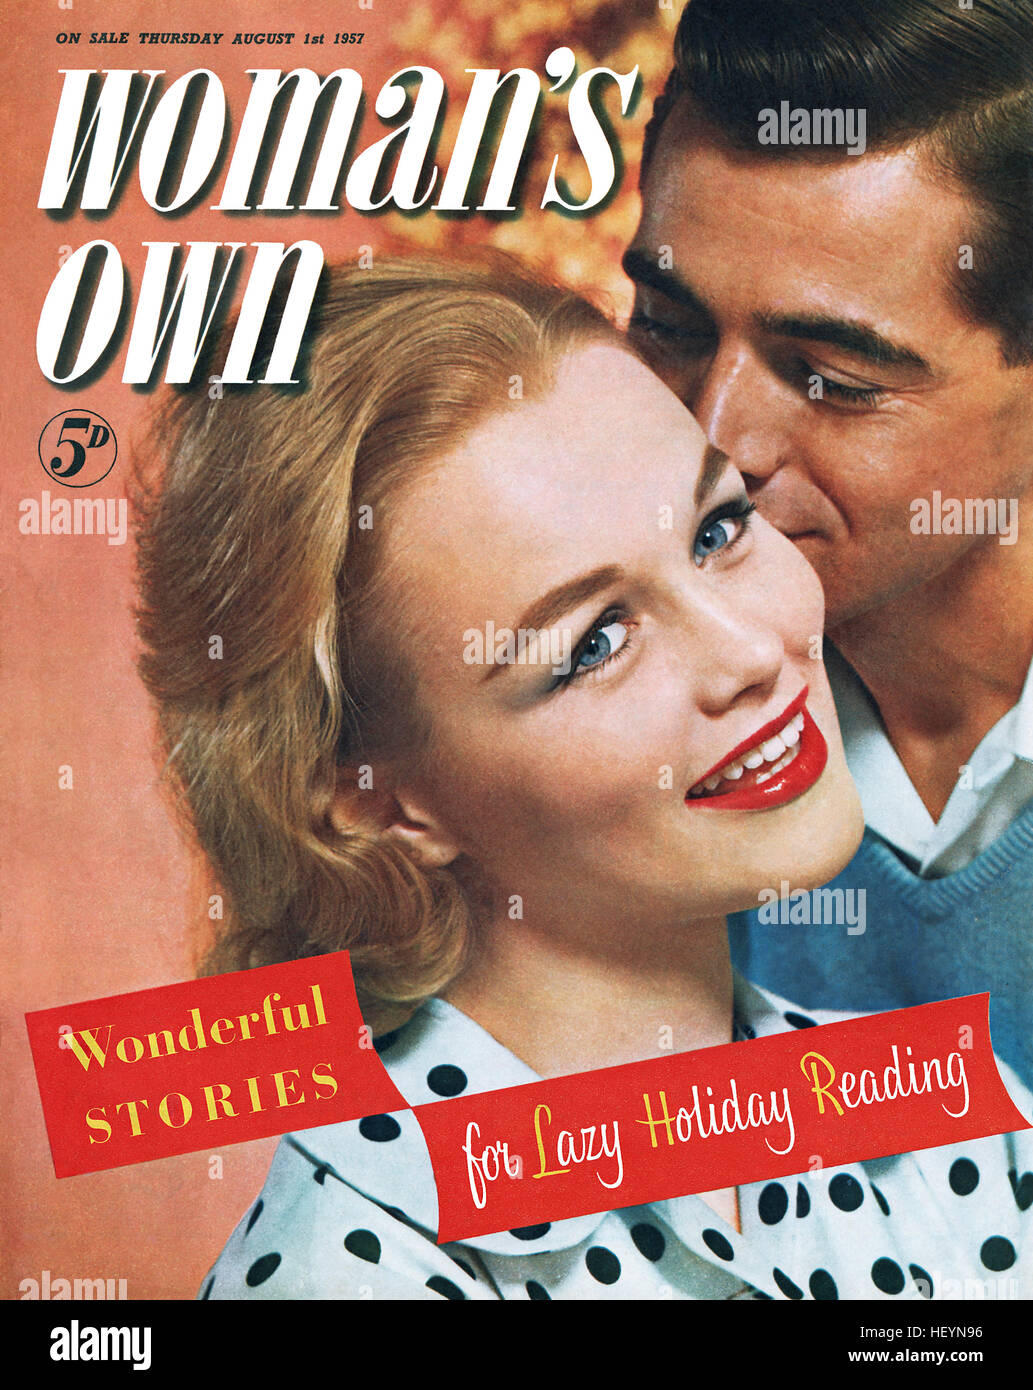 Front cover of Woman's Own magazine for 1st August 1957 Stock Photo